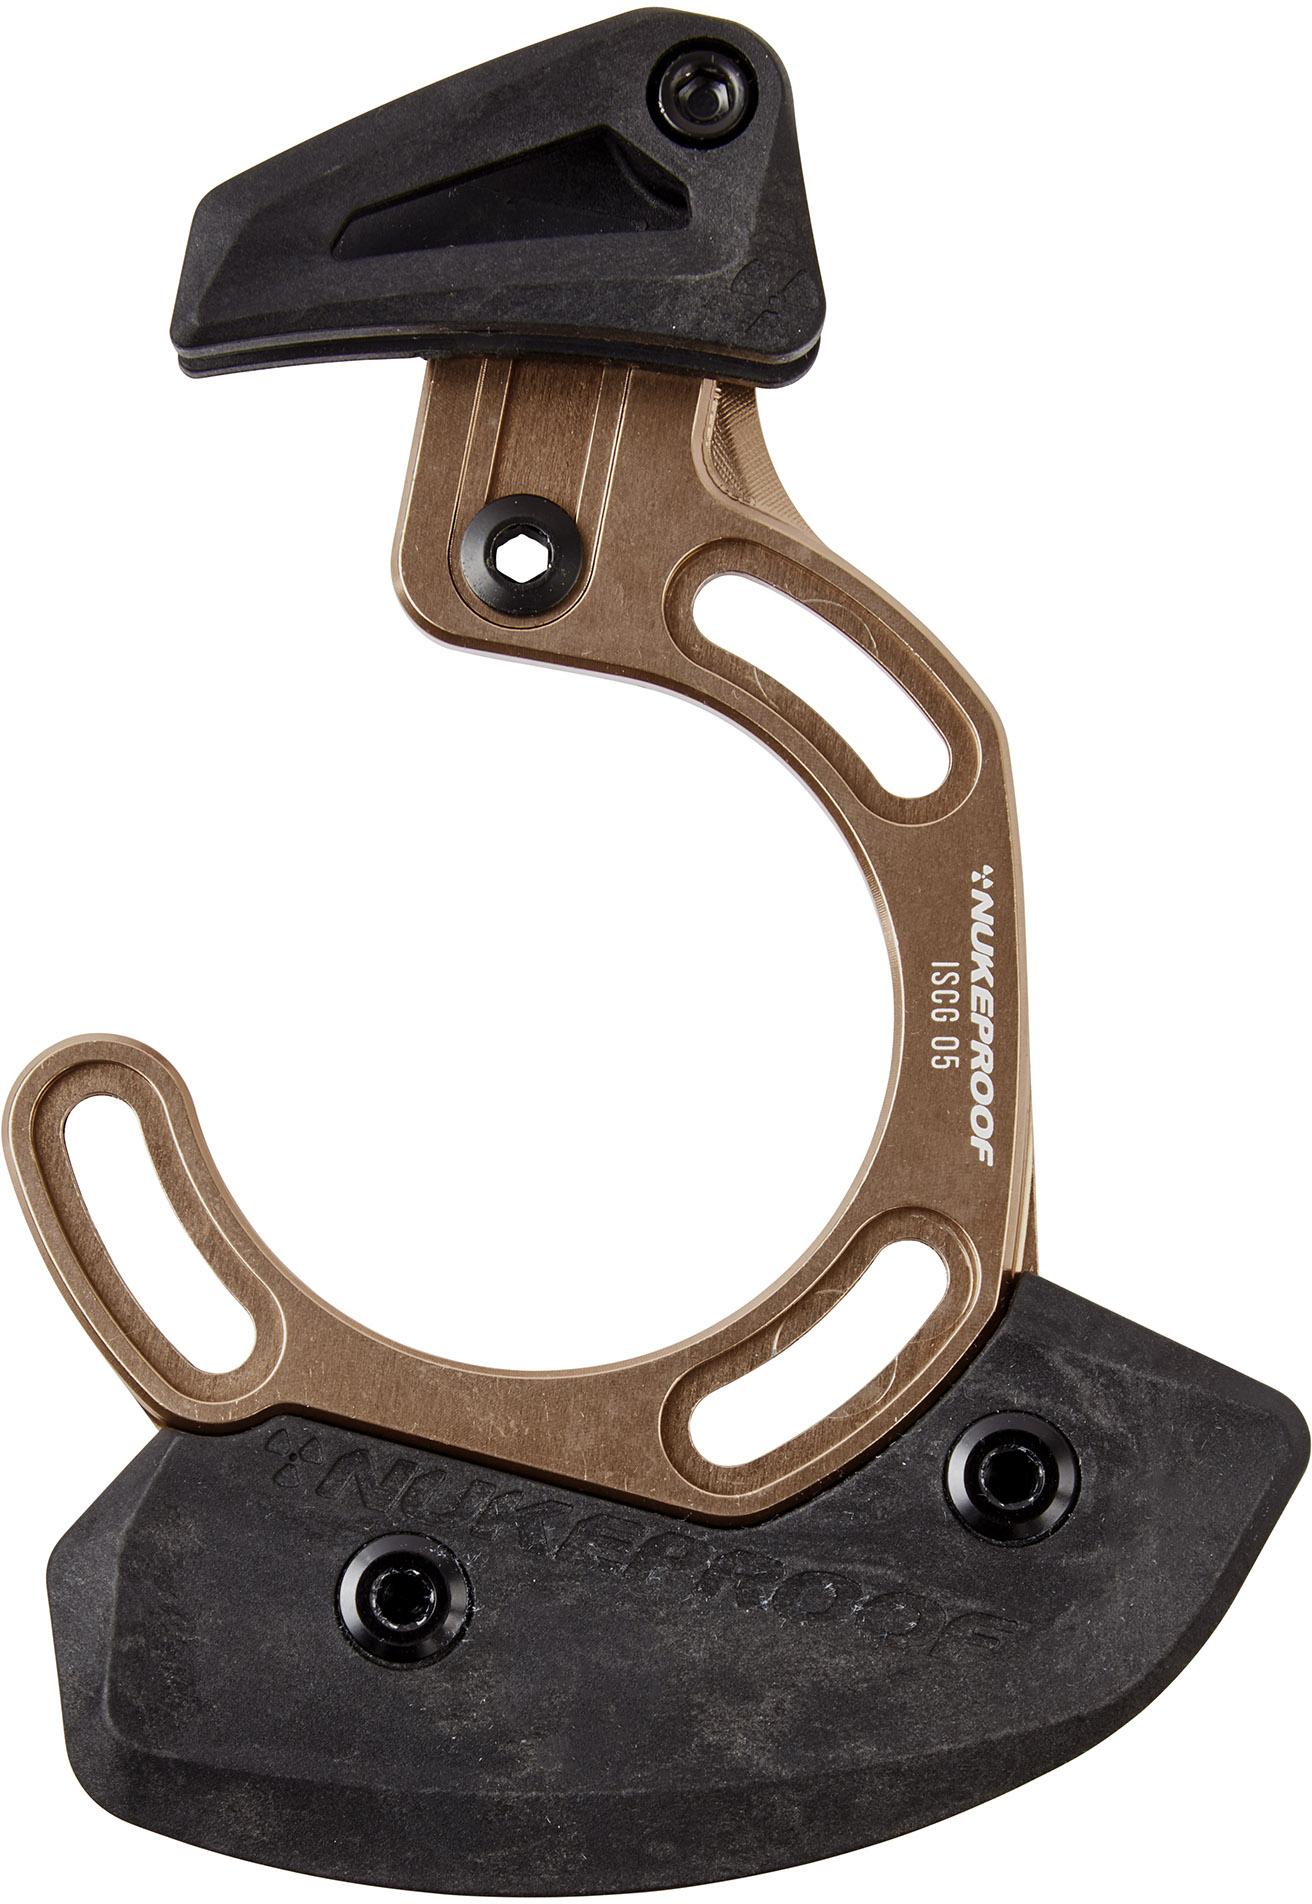 Nukeproof Chain Guide Iscg 05 Top Guide With Bash  Copper/black